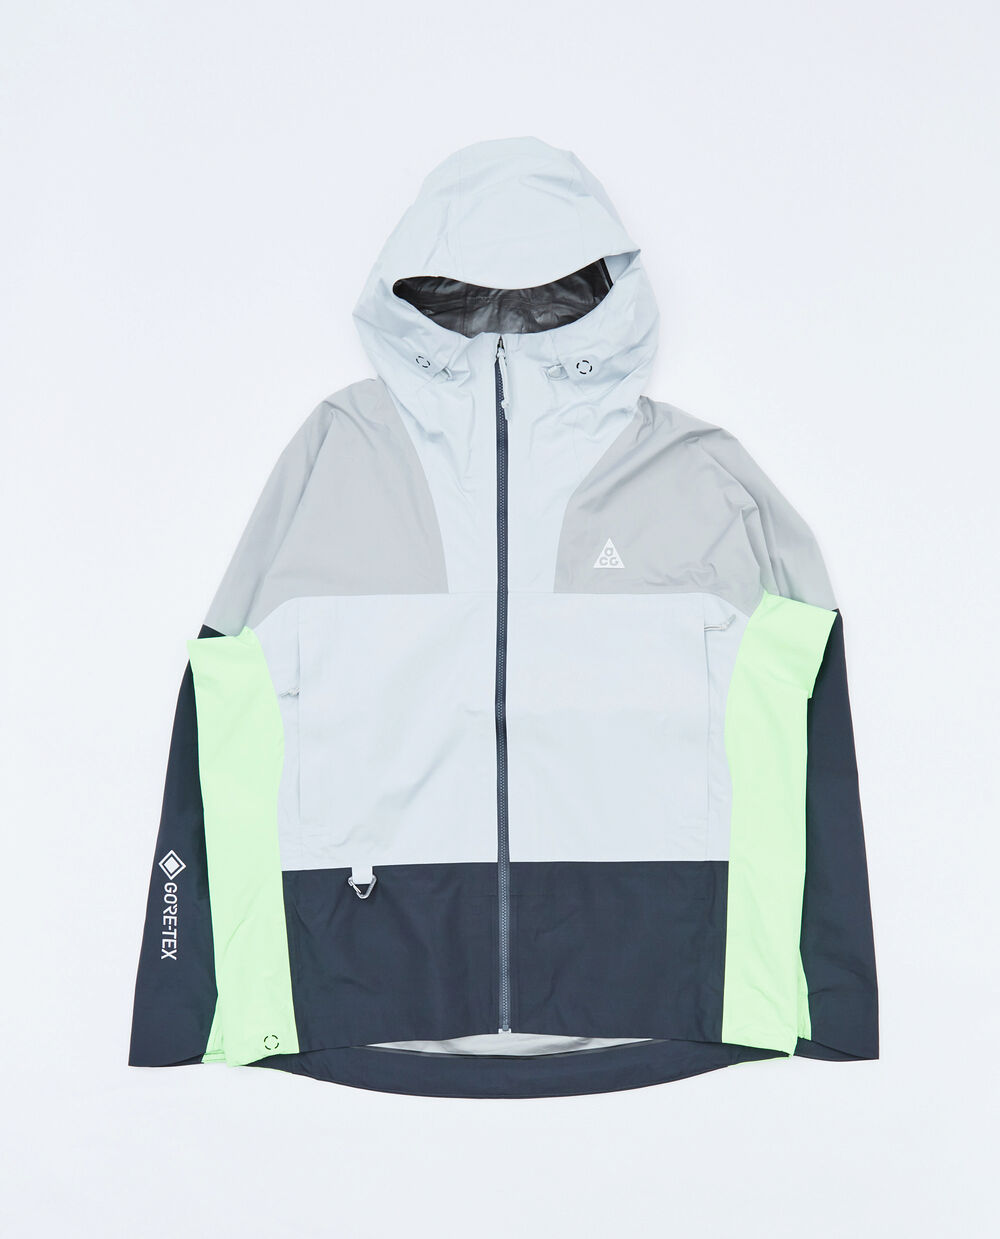 NIKE ACG M ADV ACG CHAIN OF CRATERS JACKET